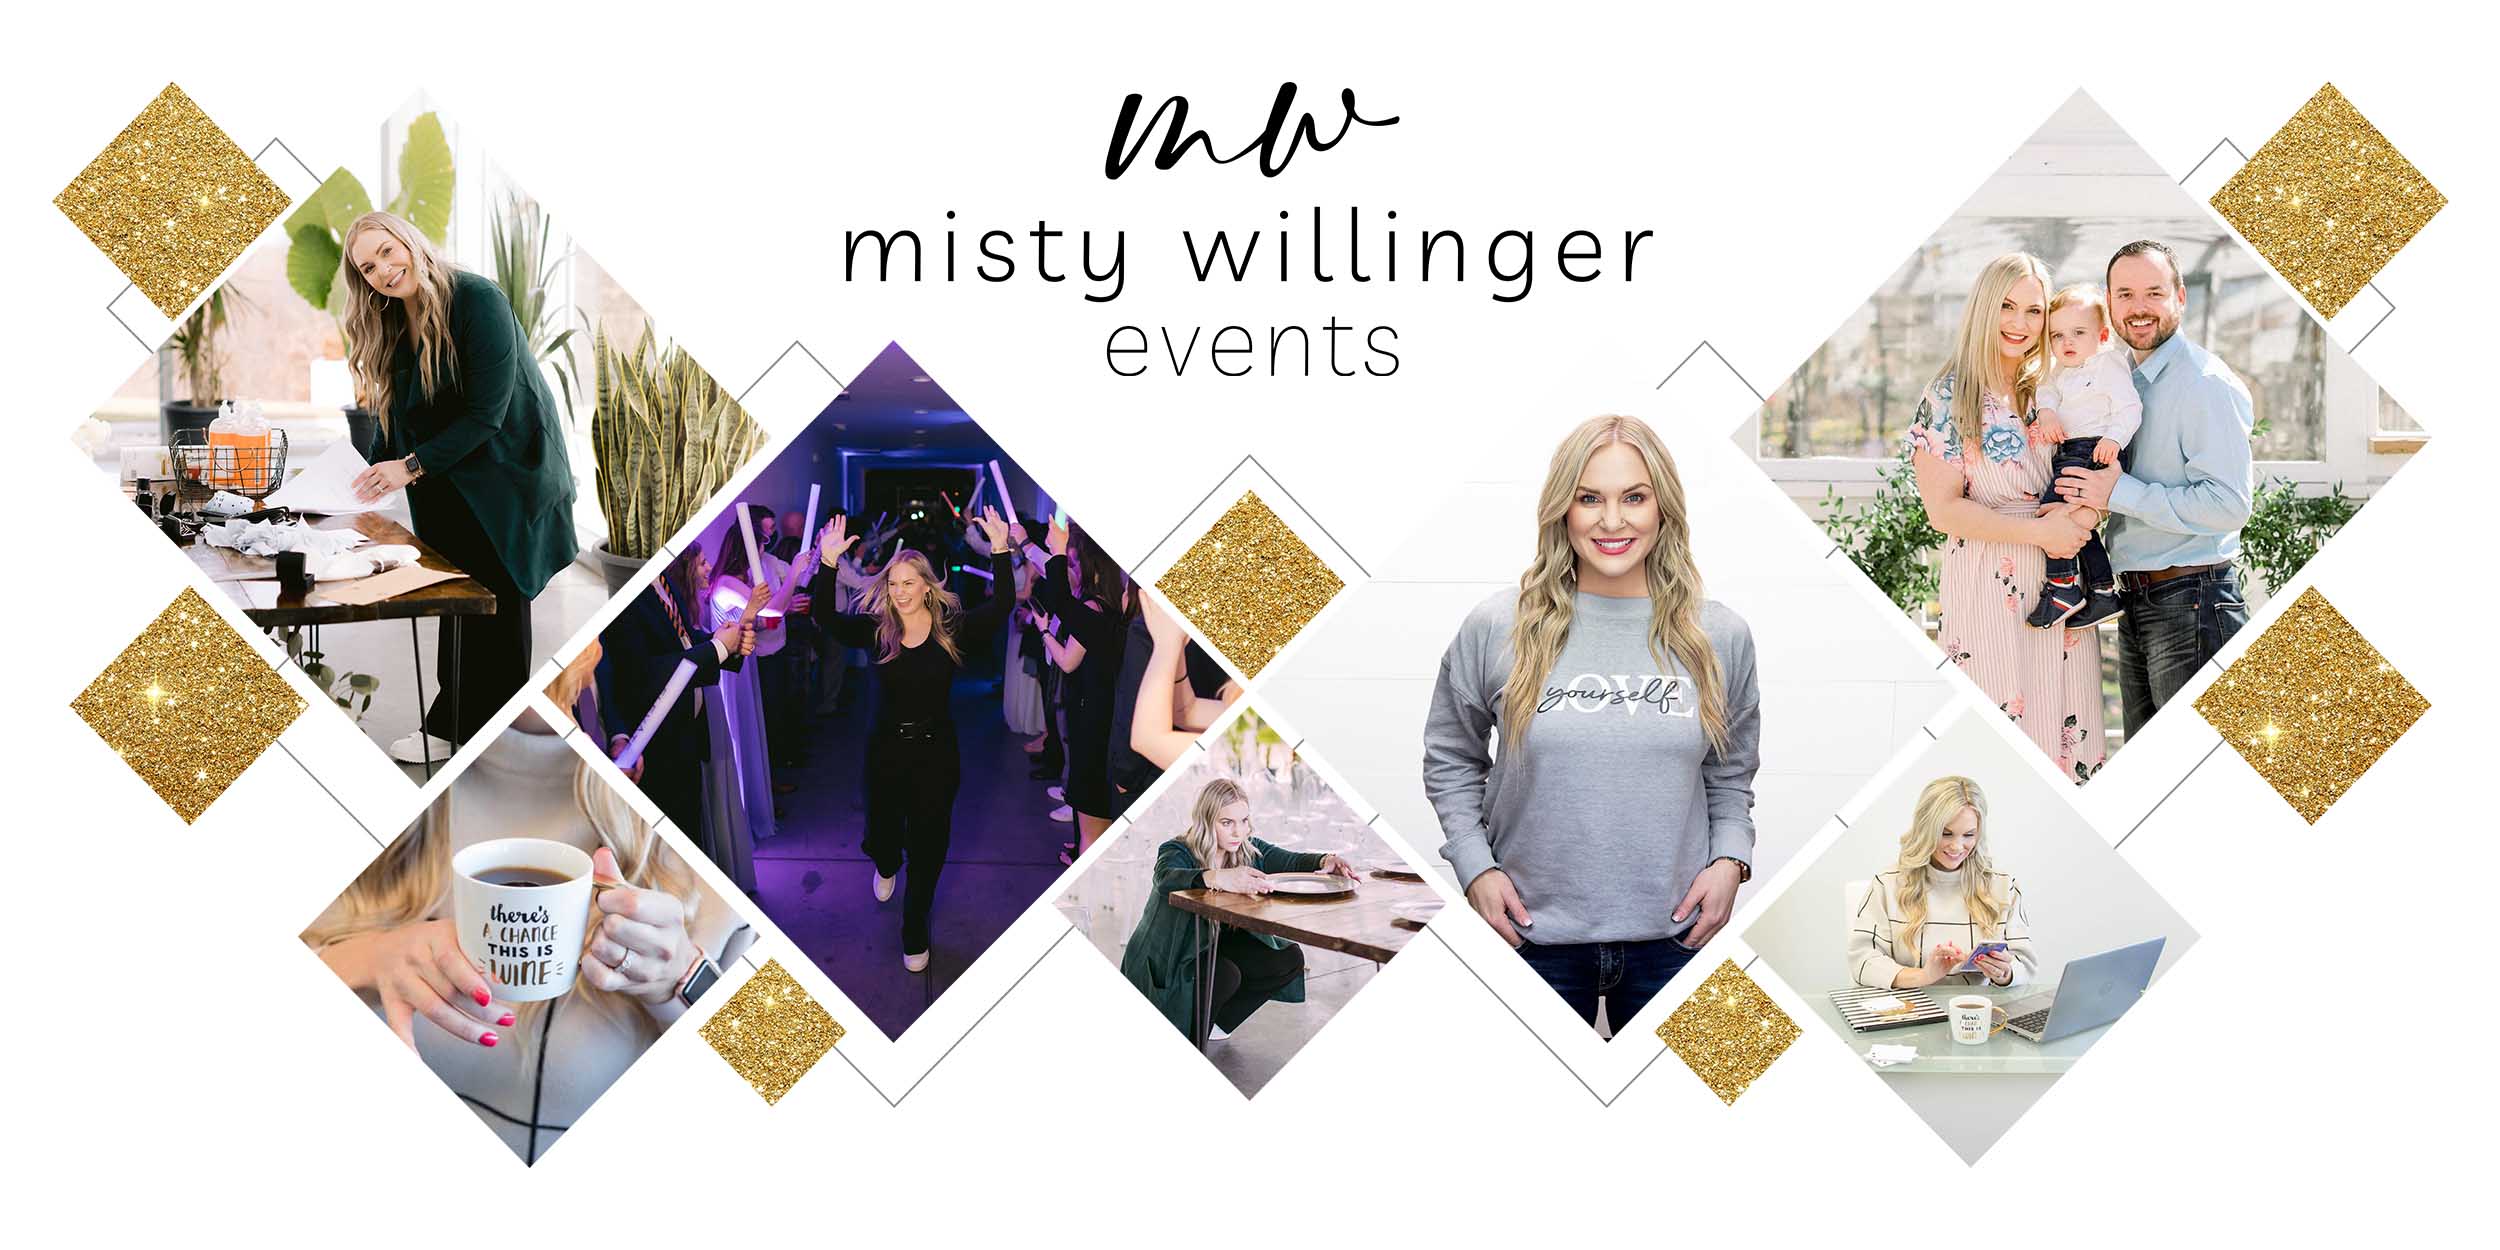 About Misty Willinger Events